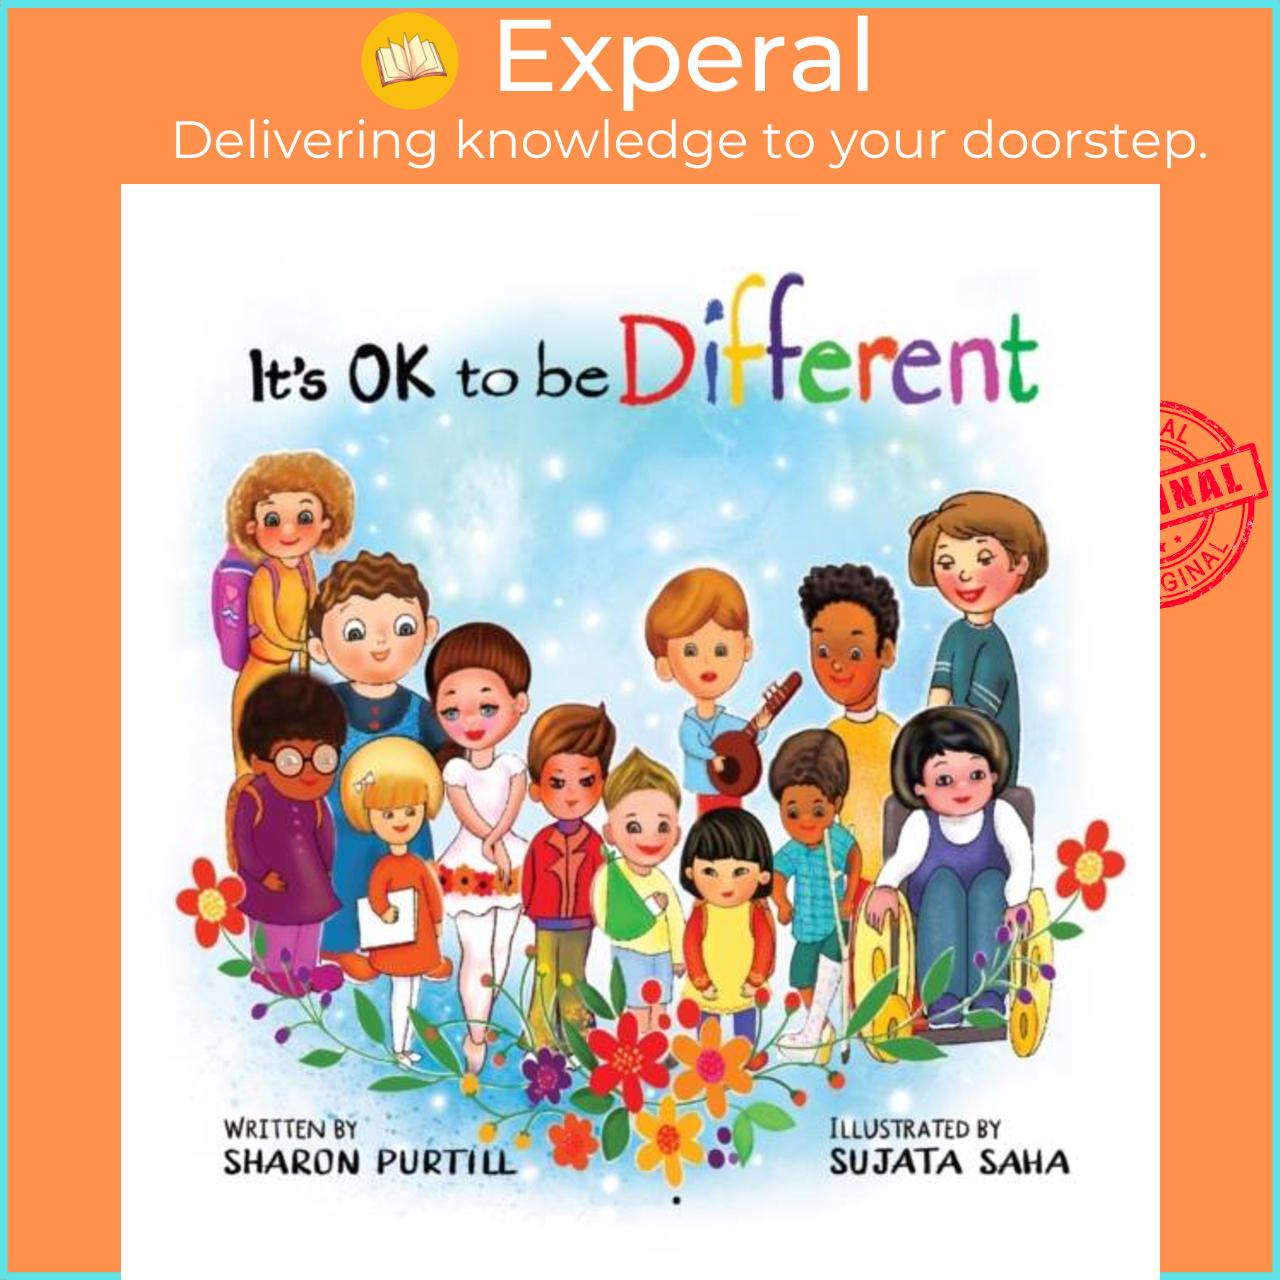 Sách - It's OK to be Different - A Children's Picture Book About Diversity and Ki by Sujata Saha (UK edition, hardcover)